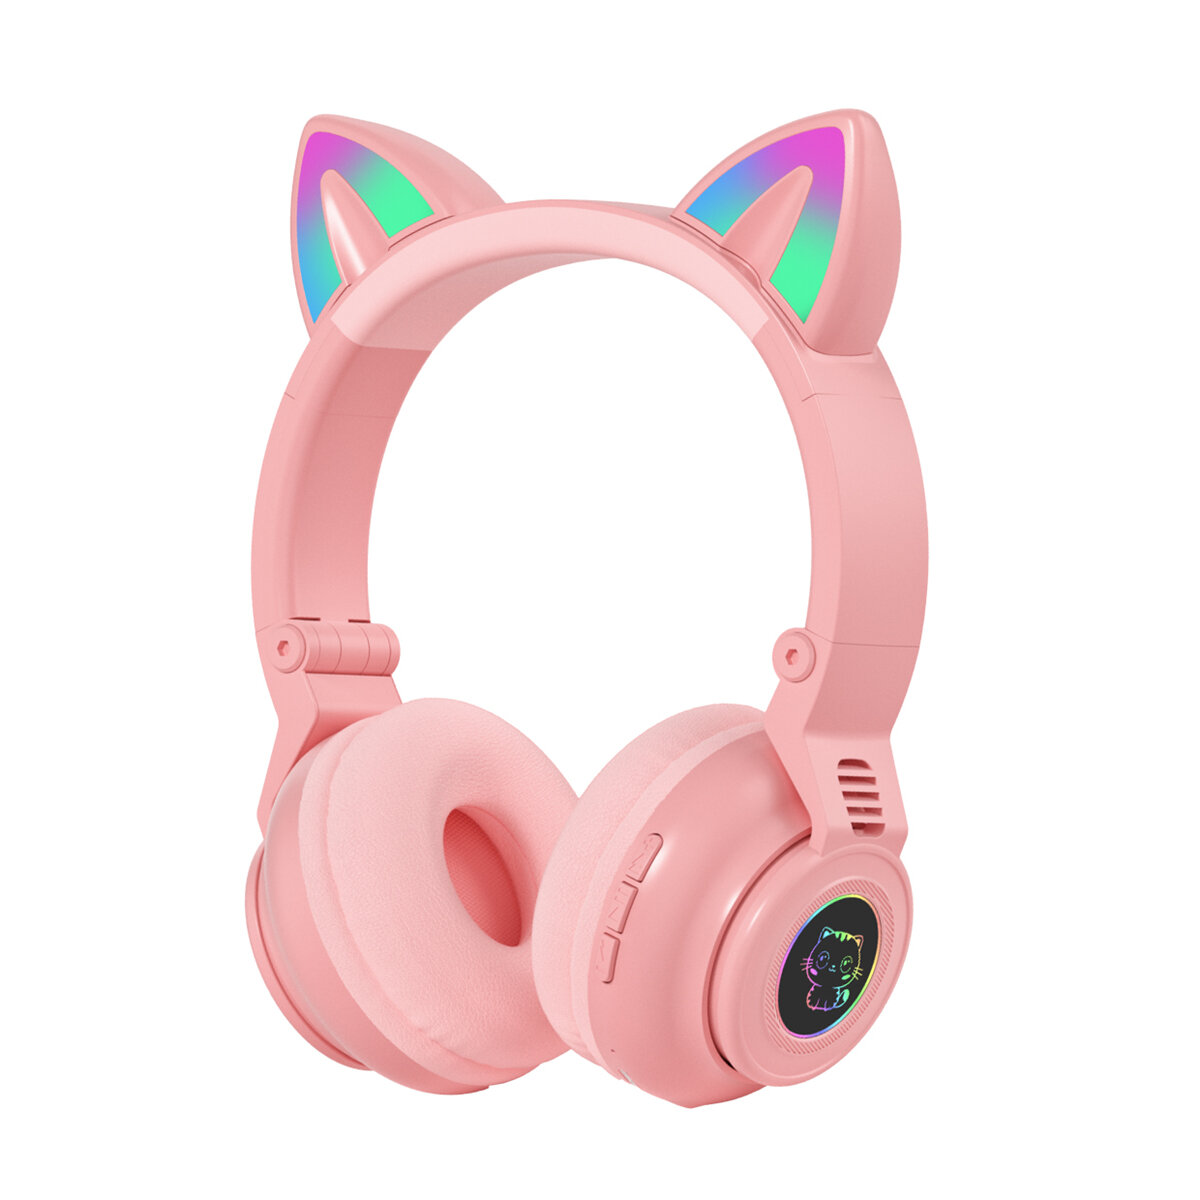 STN STN26 bluetooth Headset Cat Ears Wireless BT5.0 / 3.5MM Wired Dual Mode RGB Light Bass Noise Cancelling Foldable Headphones for Adults Kids Girls Headset Support TF Card/MP3/FM